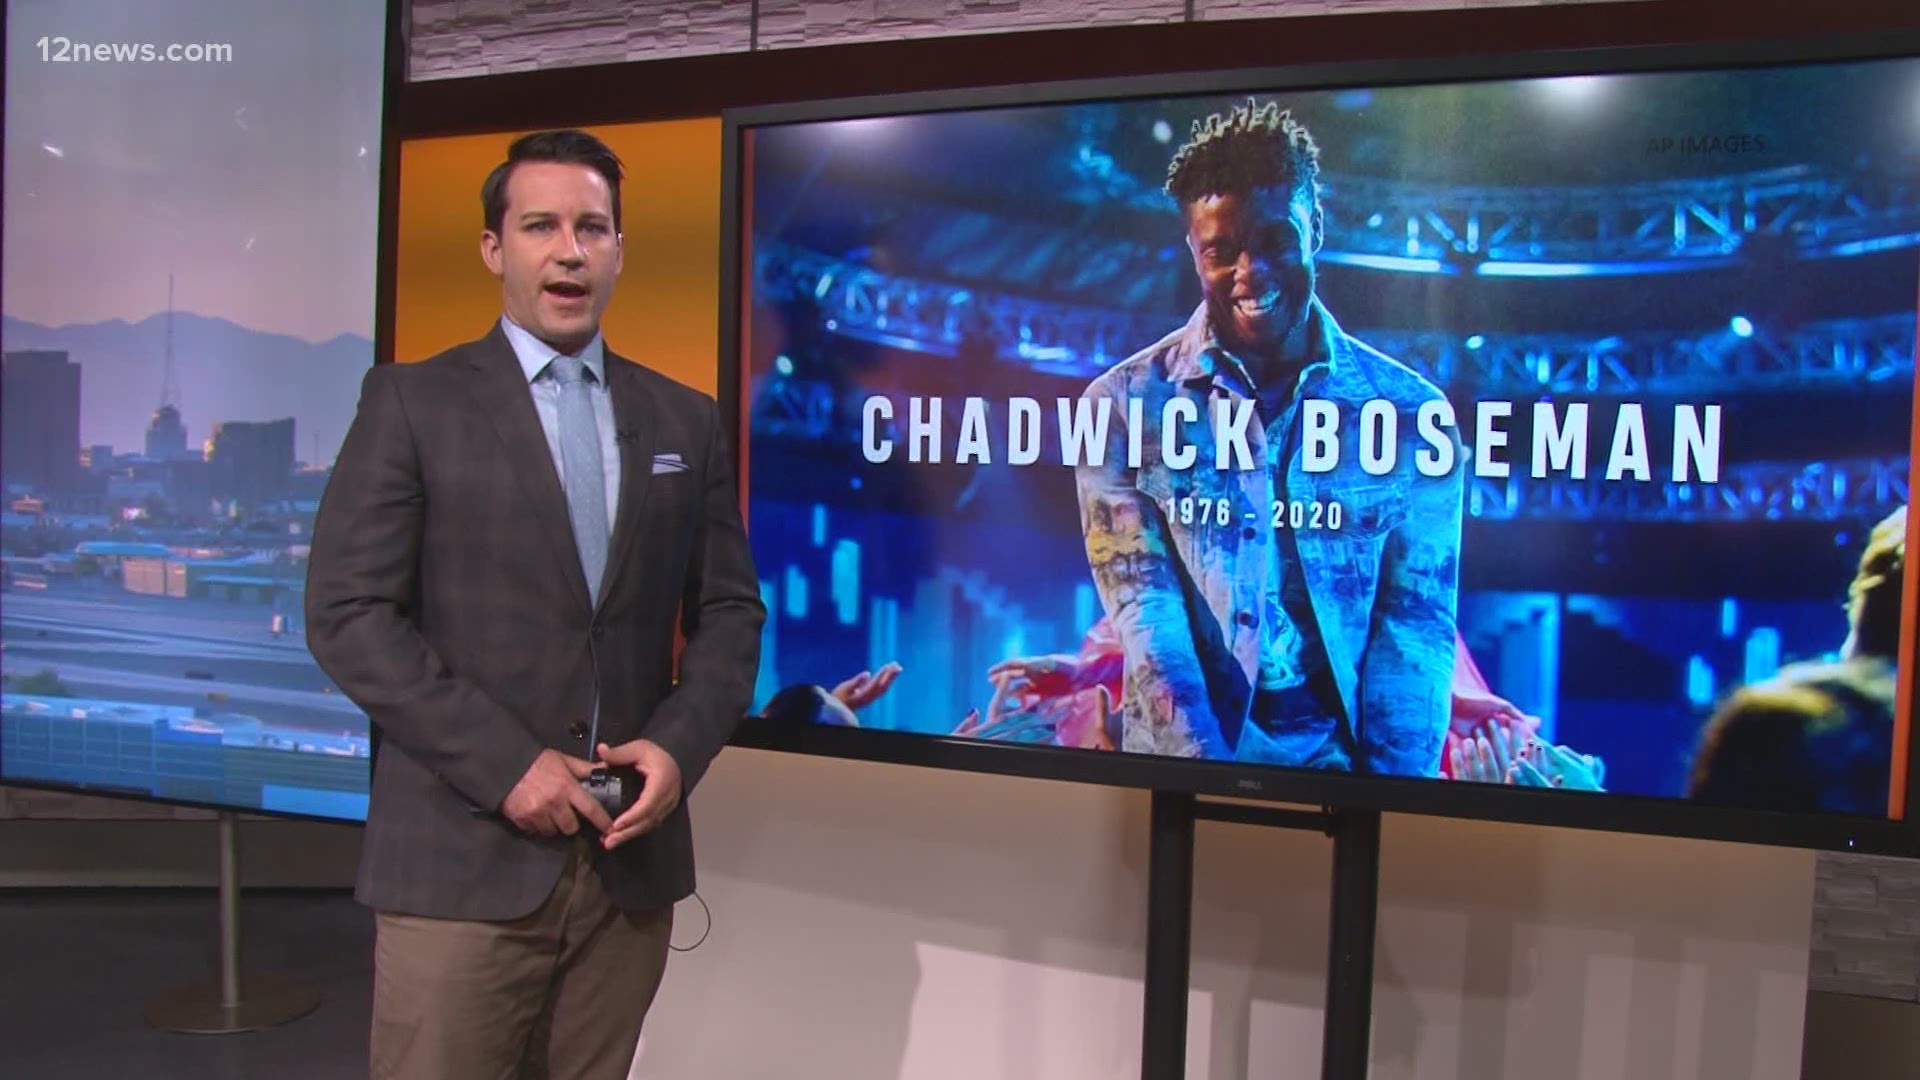 Chadwick Boseman lost his battle with colon cancer on Friday. He was 43.